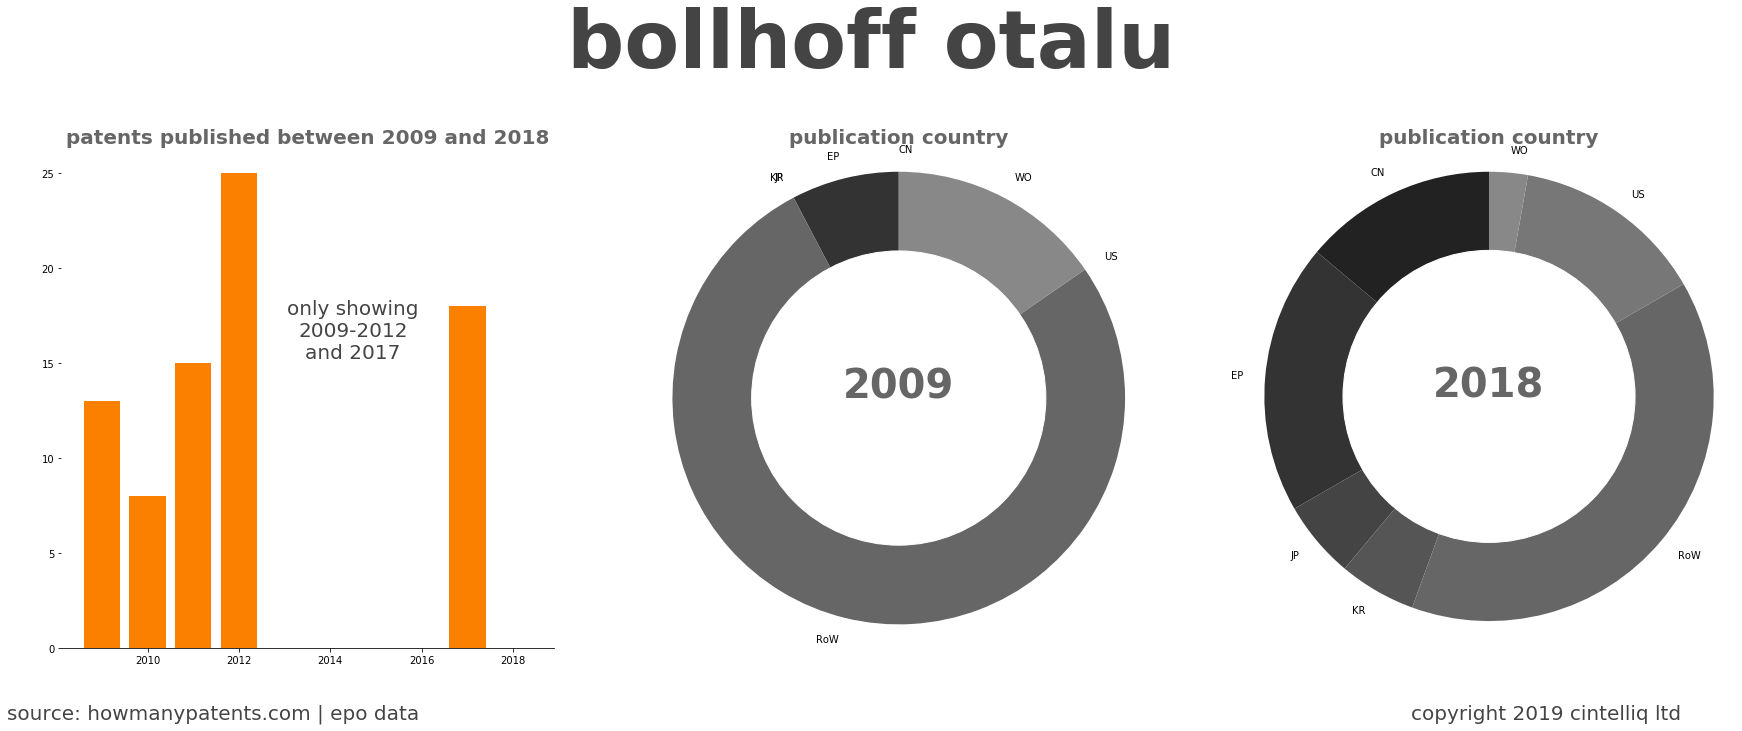 summary of patents for Bollhoff Otalu